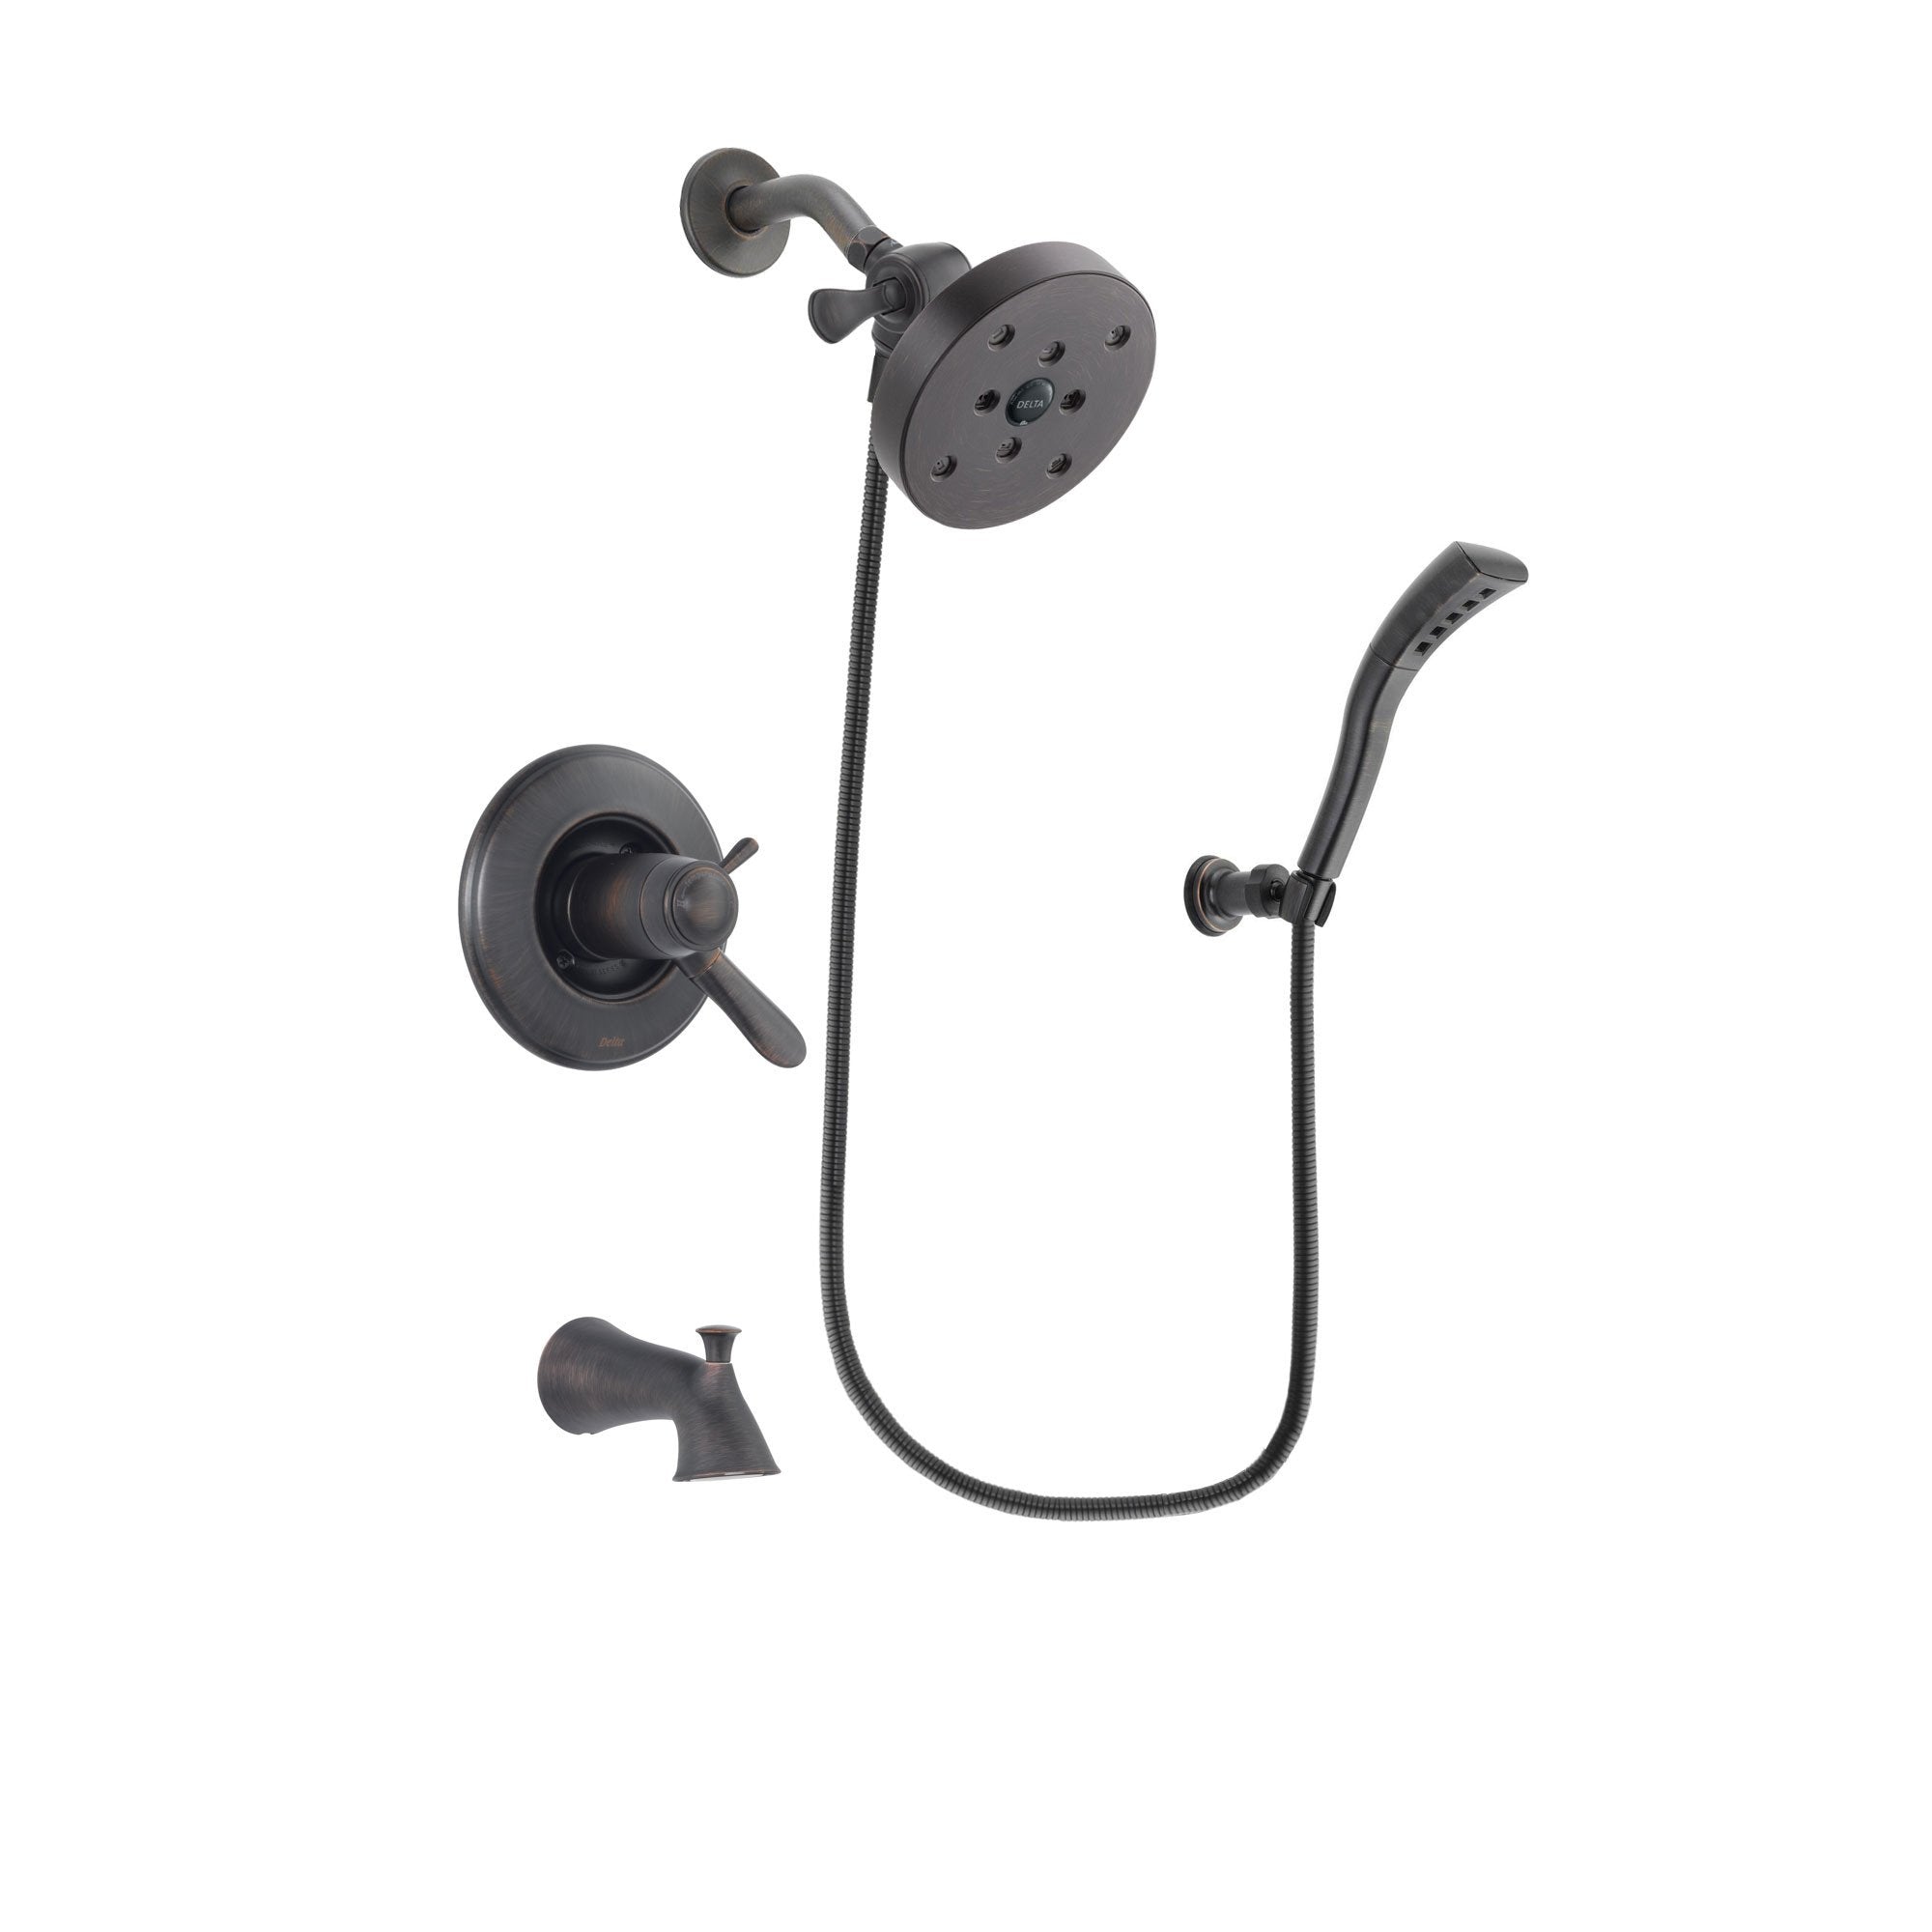 Delta Lahara Venetian Bronze Finish Thermostatic Tub and Shower Faucet System Package with 5-1/2 inch Showerhead and Modern Wall Mount Personal Handheld Shower Spray Includes Rough-in Valve and Tub Spout DSP2951V